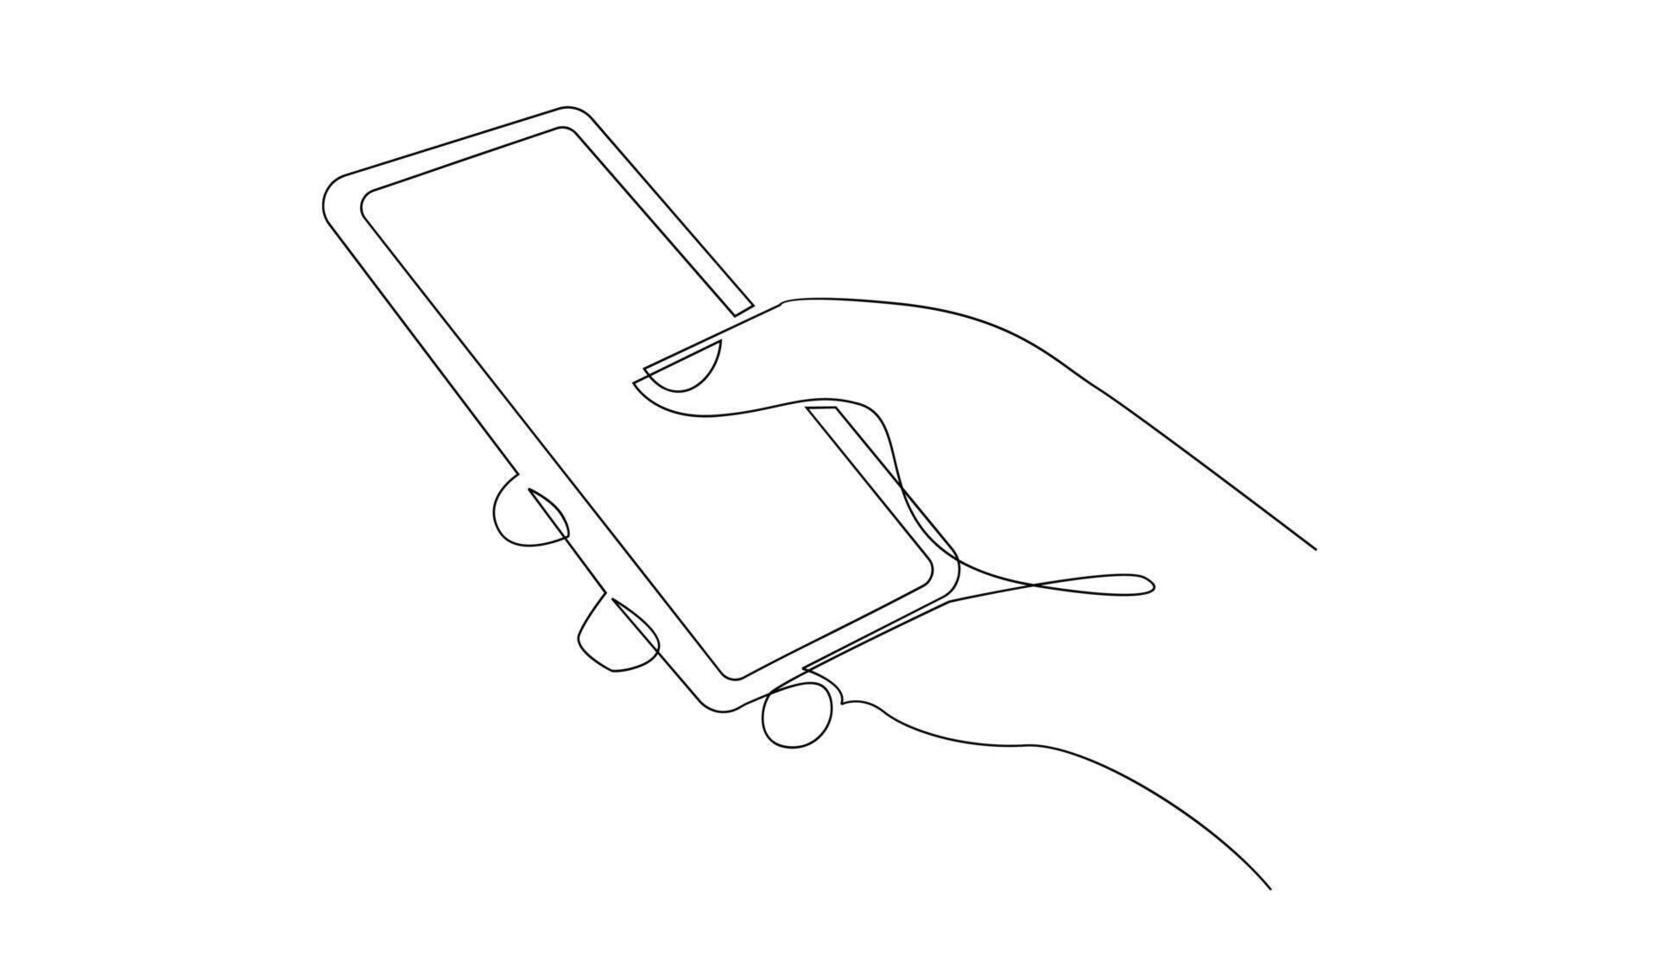 Hand holding phone continues illustration design vector